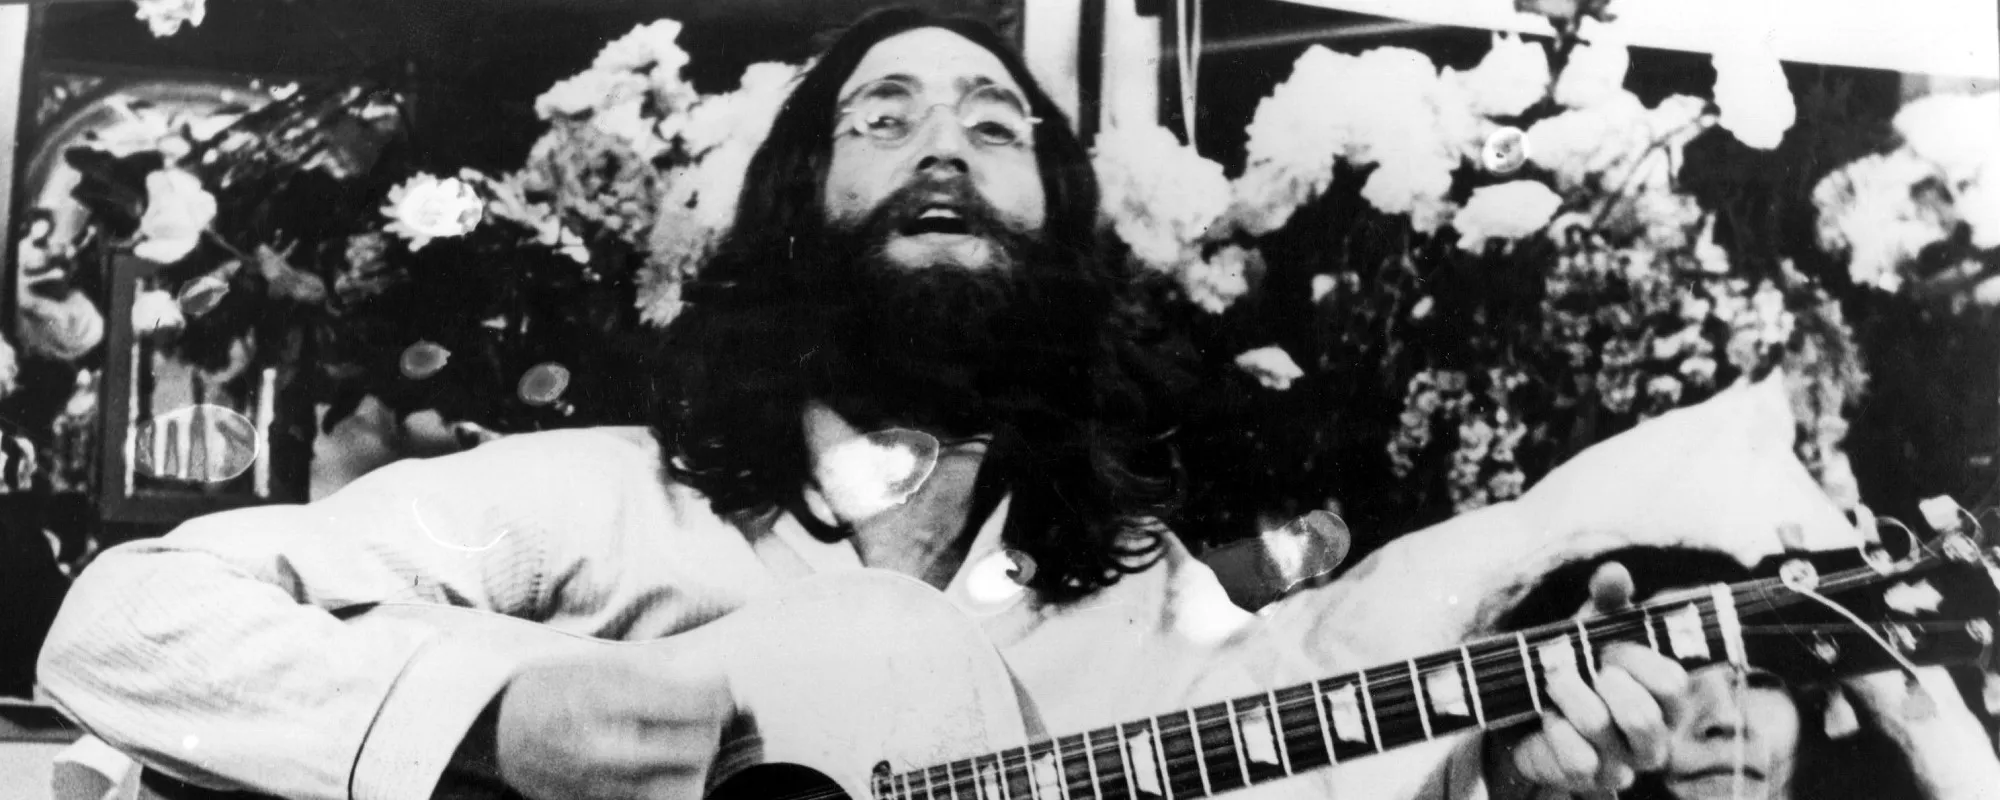 Rare Vinyl Discs Featuring John Lennon’s “Give Peace a Chance” Donated to Charities by Yoko Ono & Sean Lennon